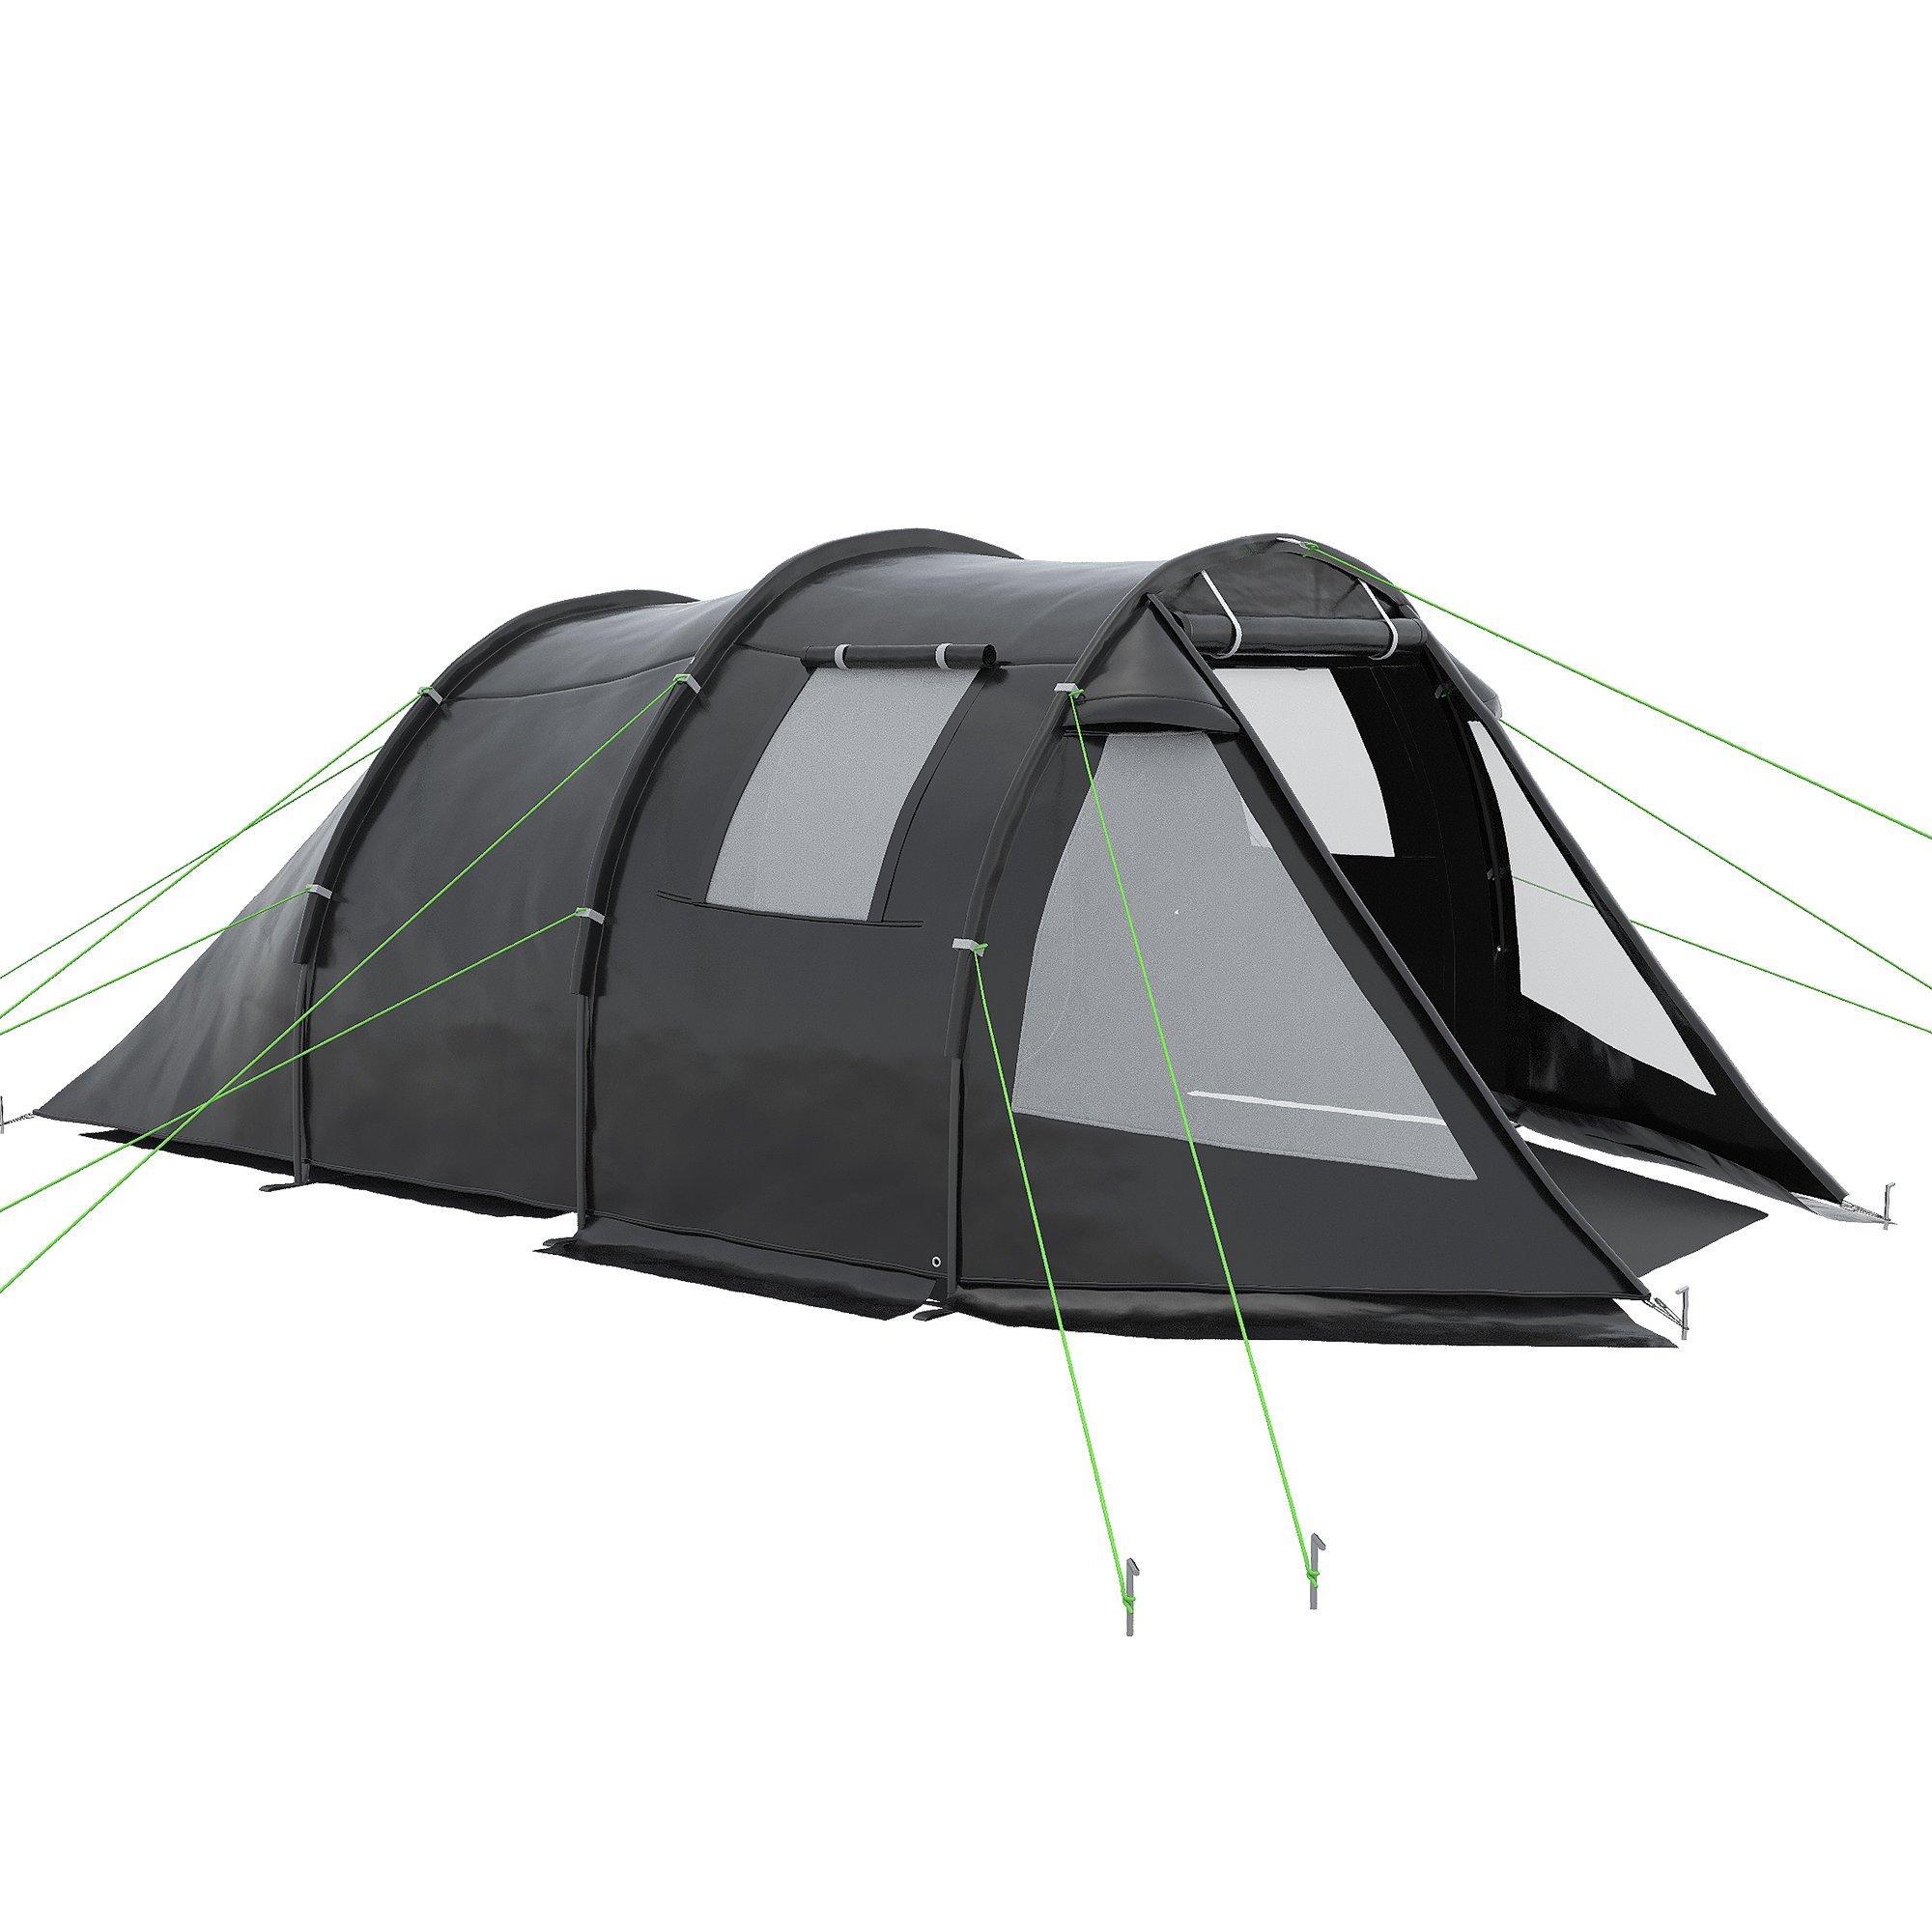 Camping Tent with 2 Rooms for 3-4 Persons, Portable Tunnel Tent with Window